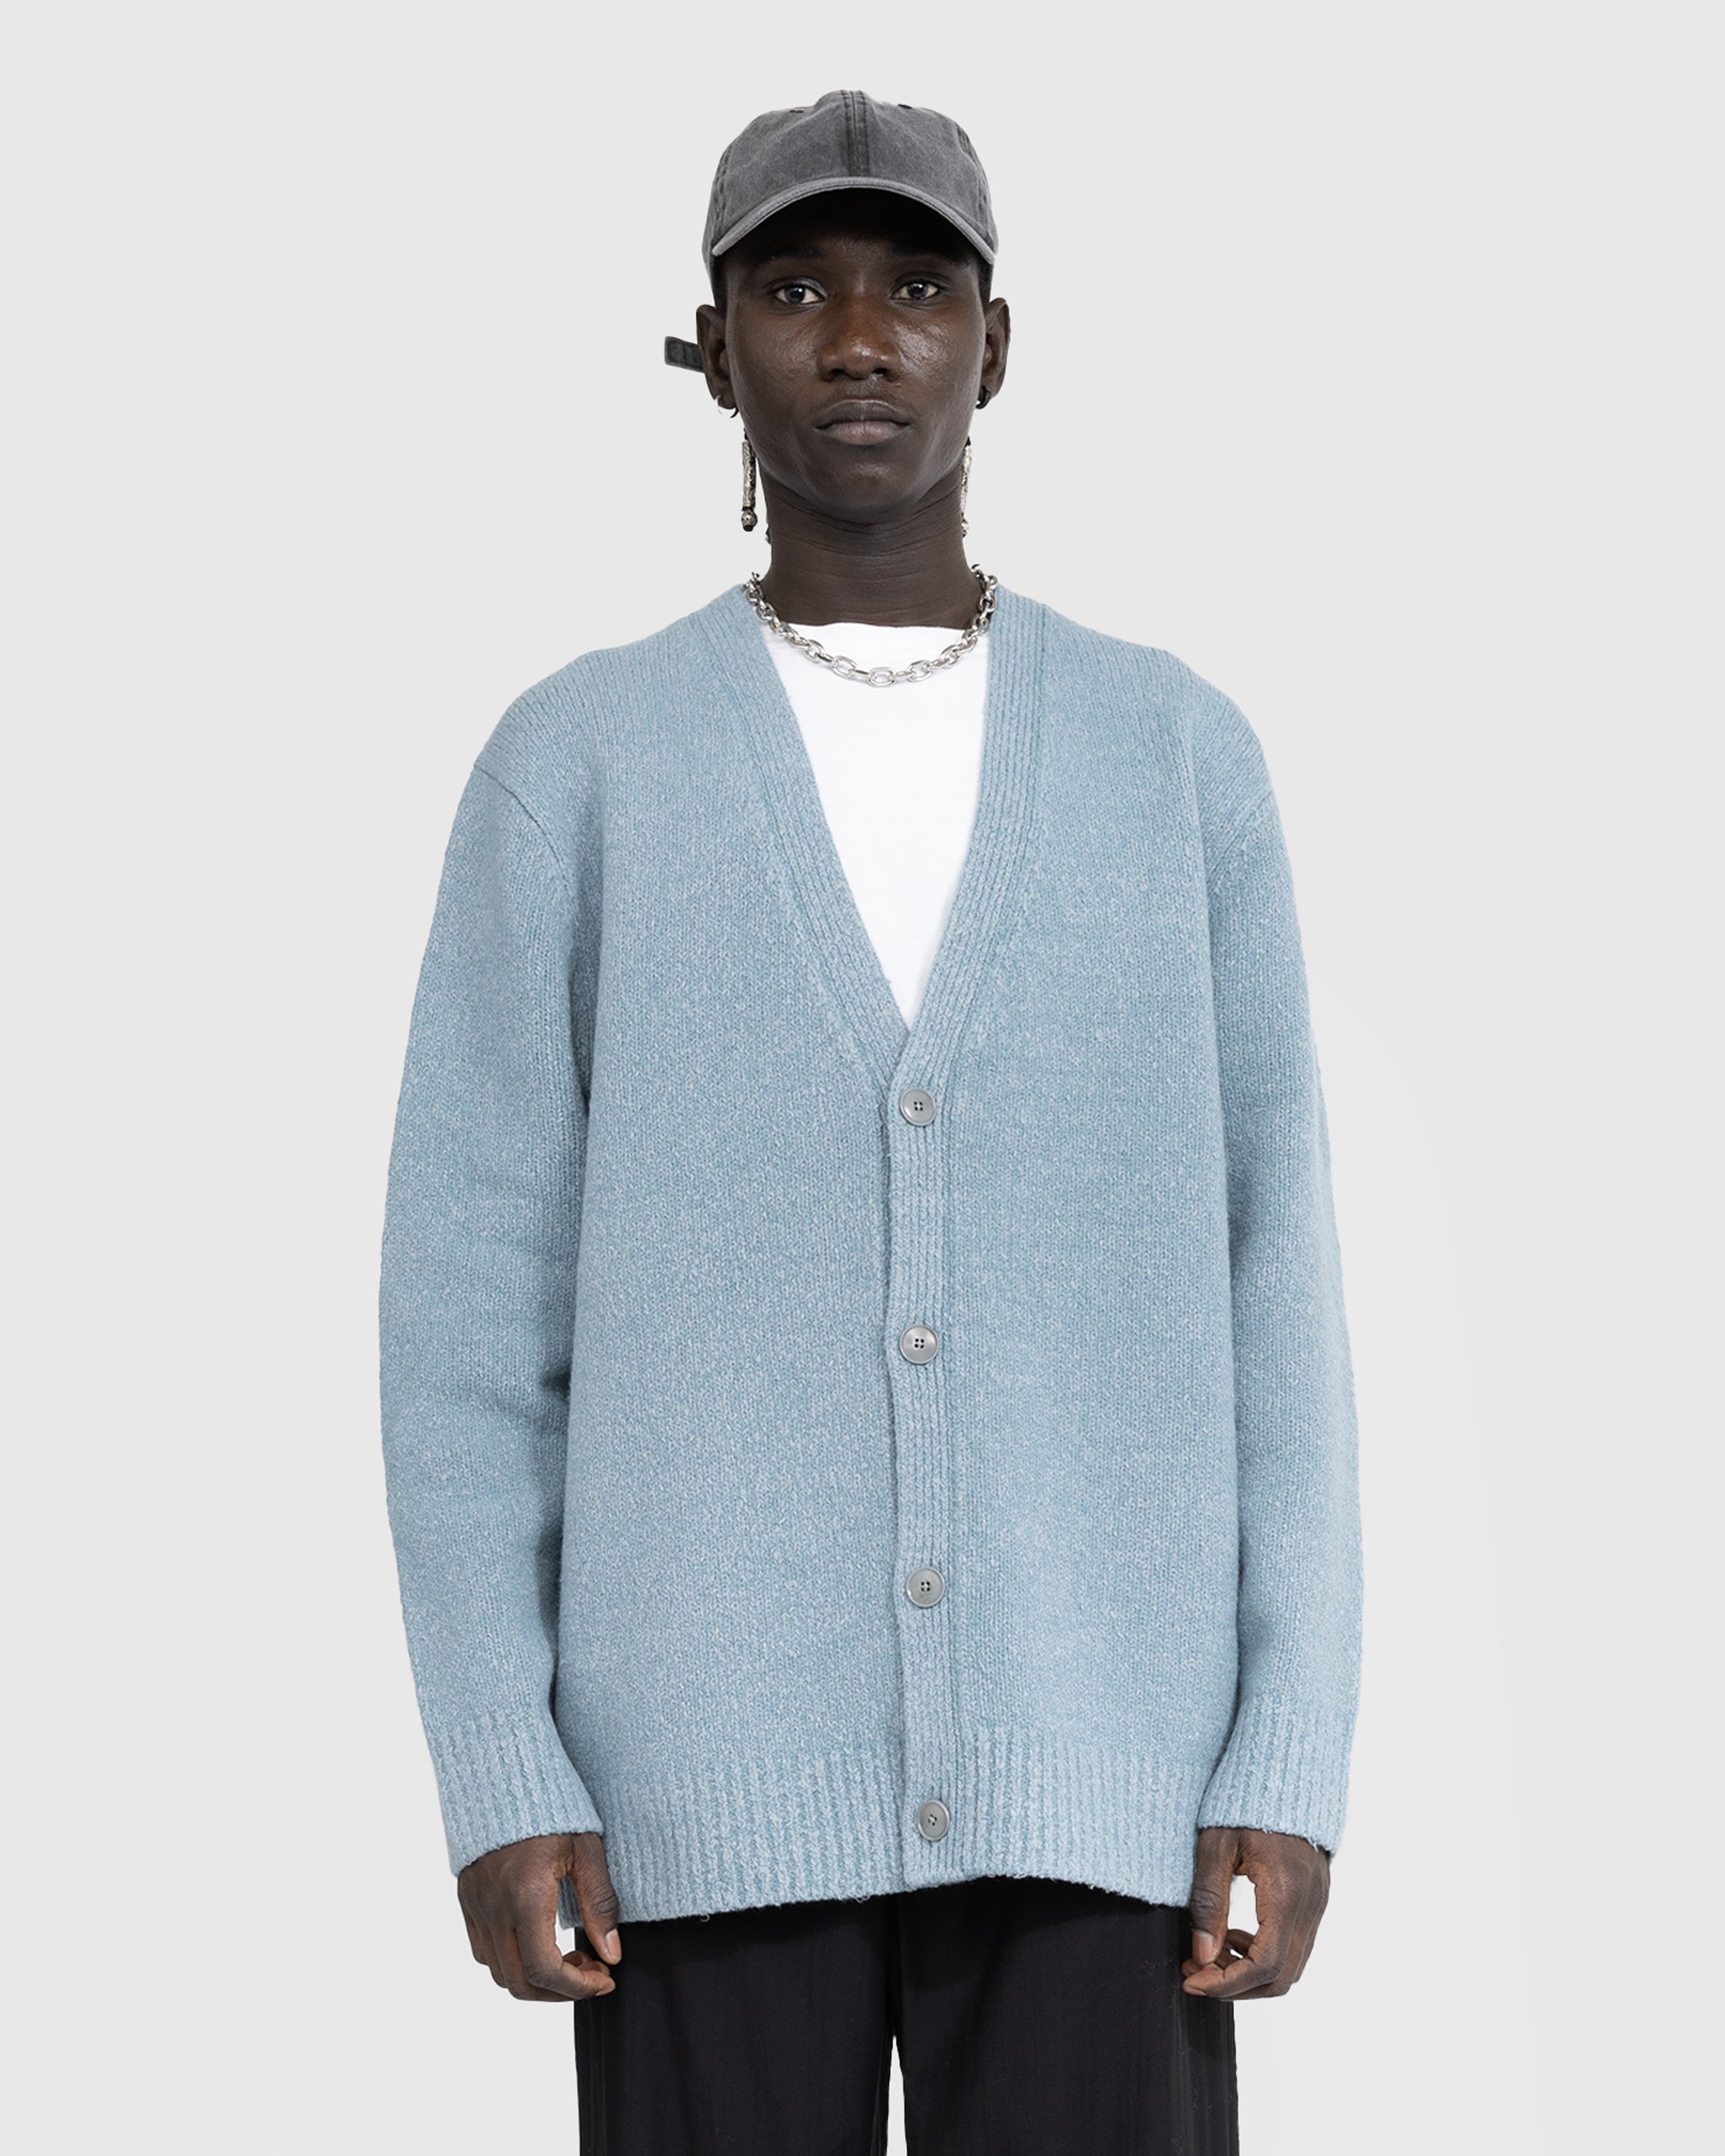 Acne Studios - FN-MN-KNIT000440 - Clothing - Blue - Image 2